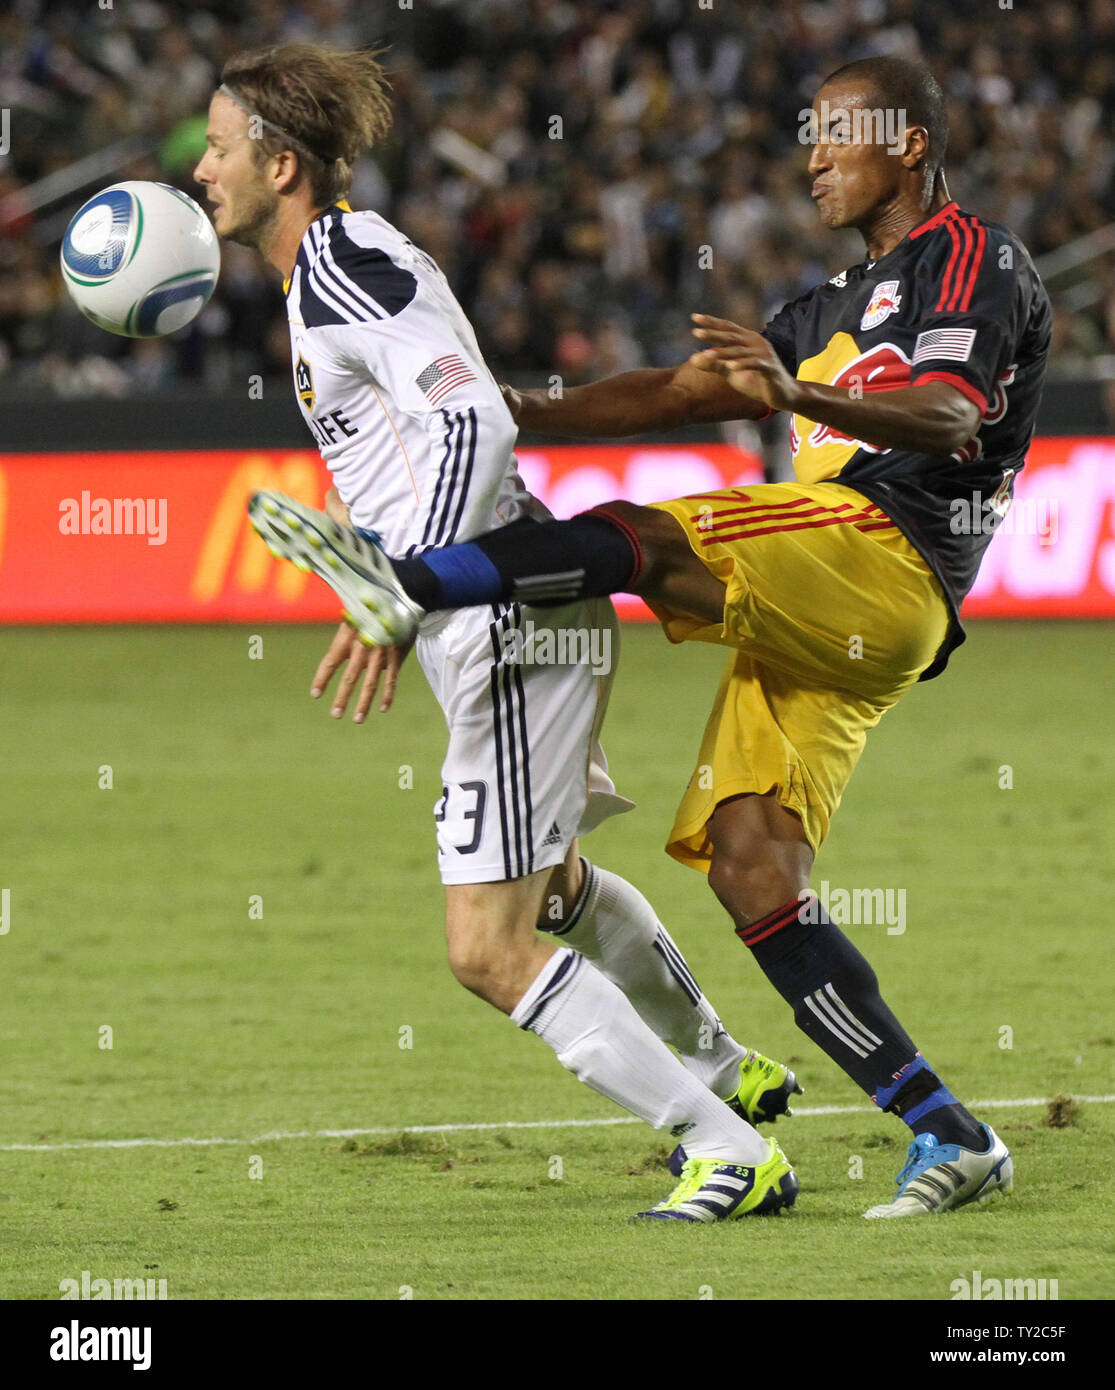 Los Angeles Galaxy midfielder David Beckham (23) is kicked in the face by New York Red Bulls defender Roy Miller in the second half in the MLS Western Conference Semifinals game at the Home Depot Center in Carson, California on Nov. 3, 2011. Miller was called for a foul and Landon Donovan kicked a penalty goal on the next play. The Galaxy won 2-1. UPI/Lori Shepler. Stock Photo